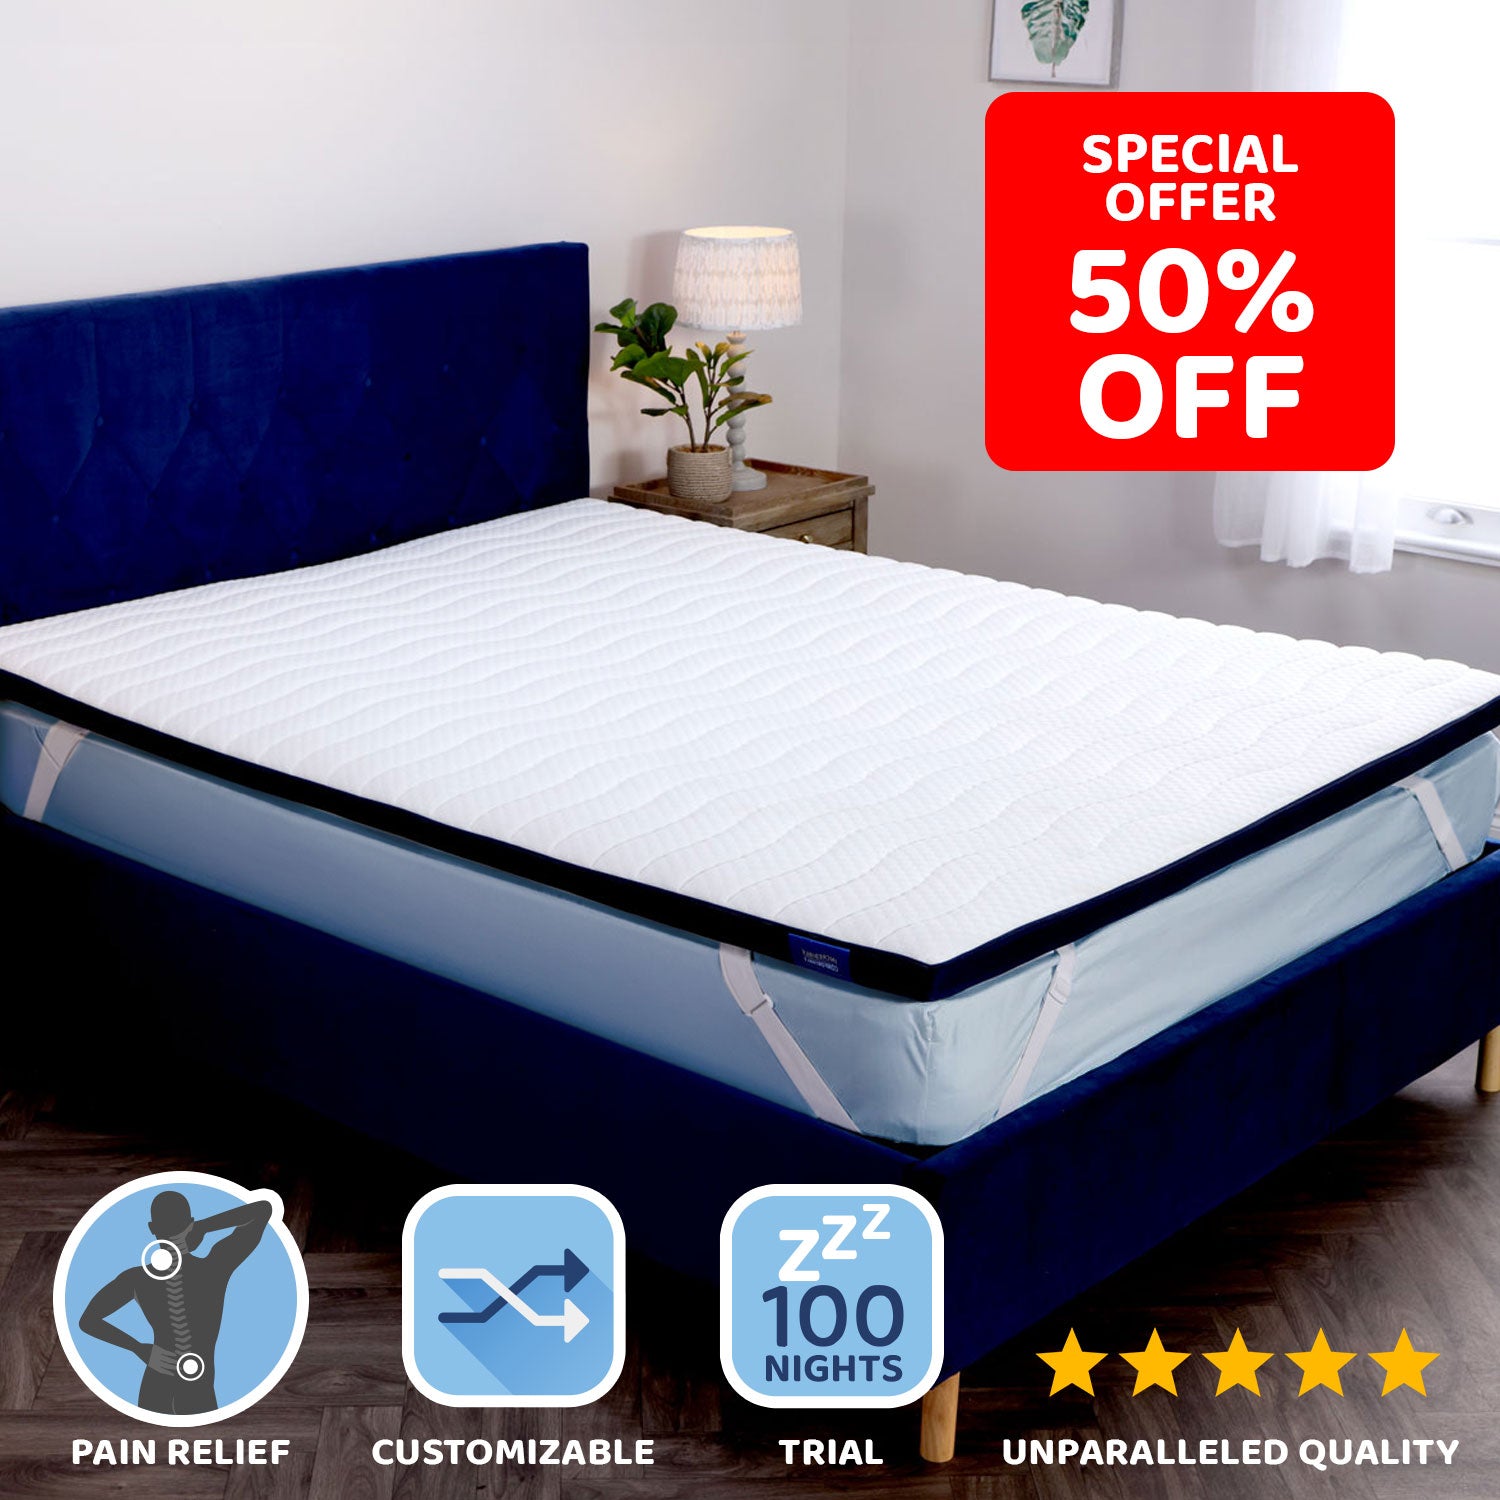 A Seriously Comfortable Revolution Mattress Topper for pain relief with reversible soft and firm side. 50% off  